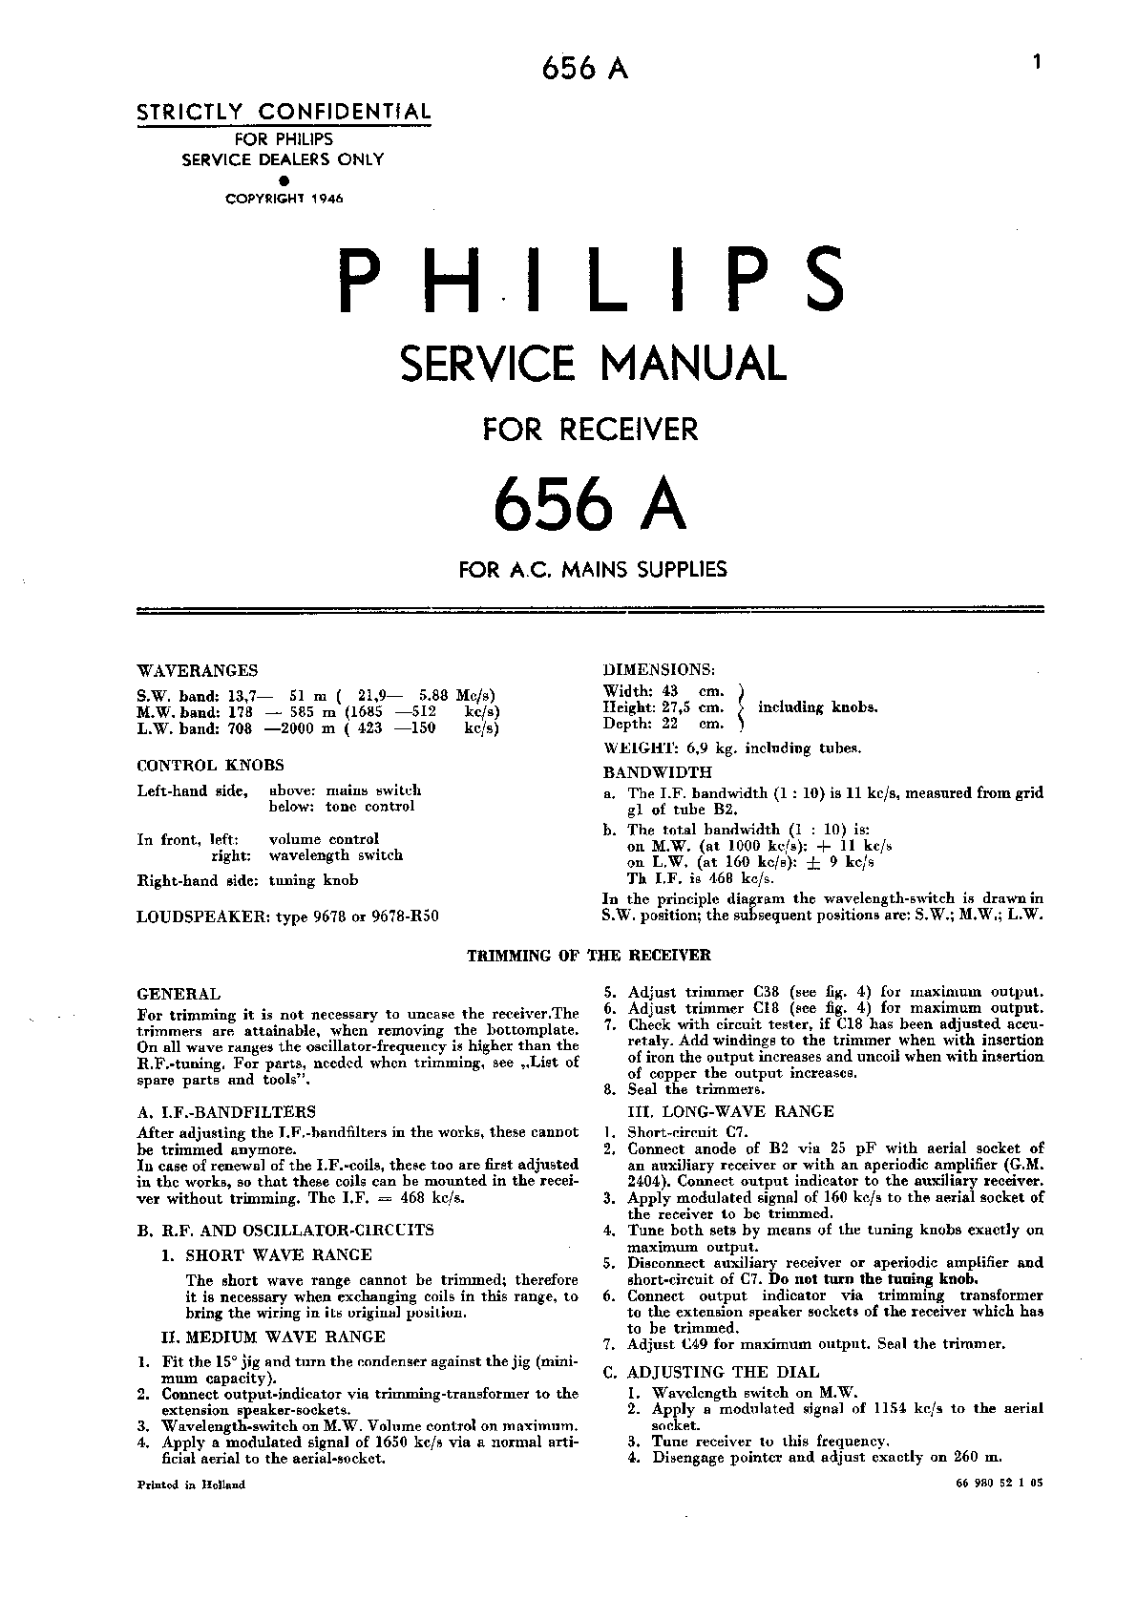 Philips 656-A Service Manual